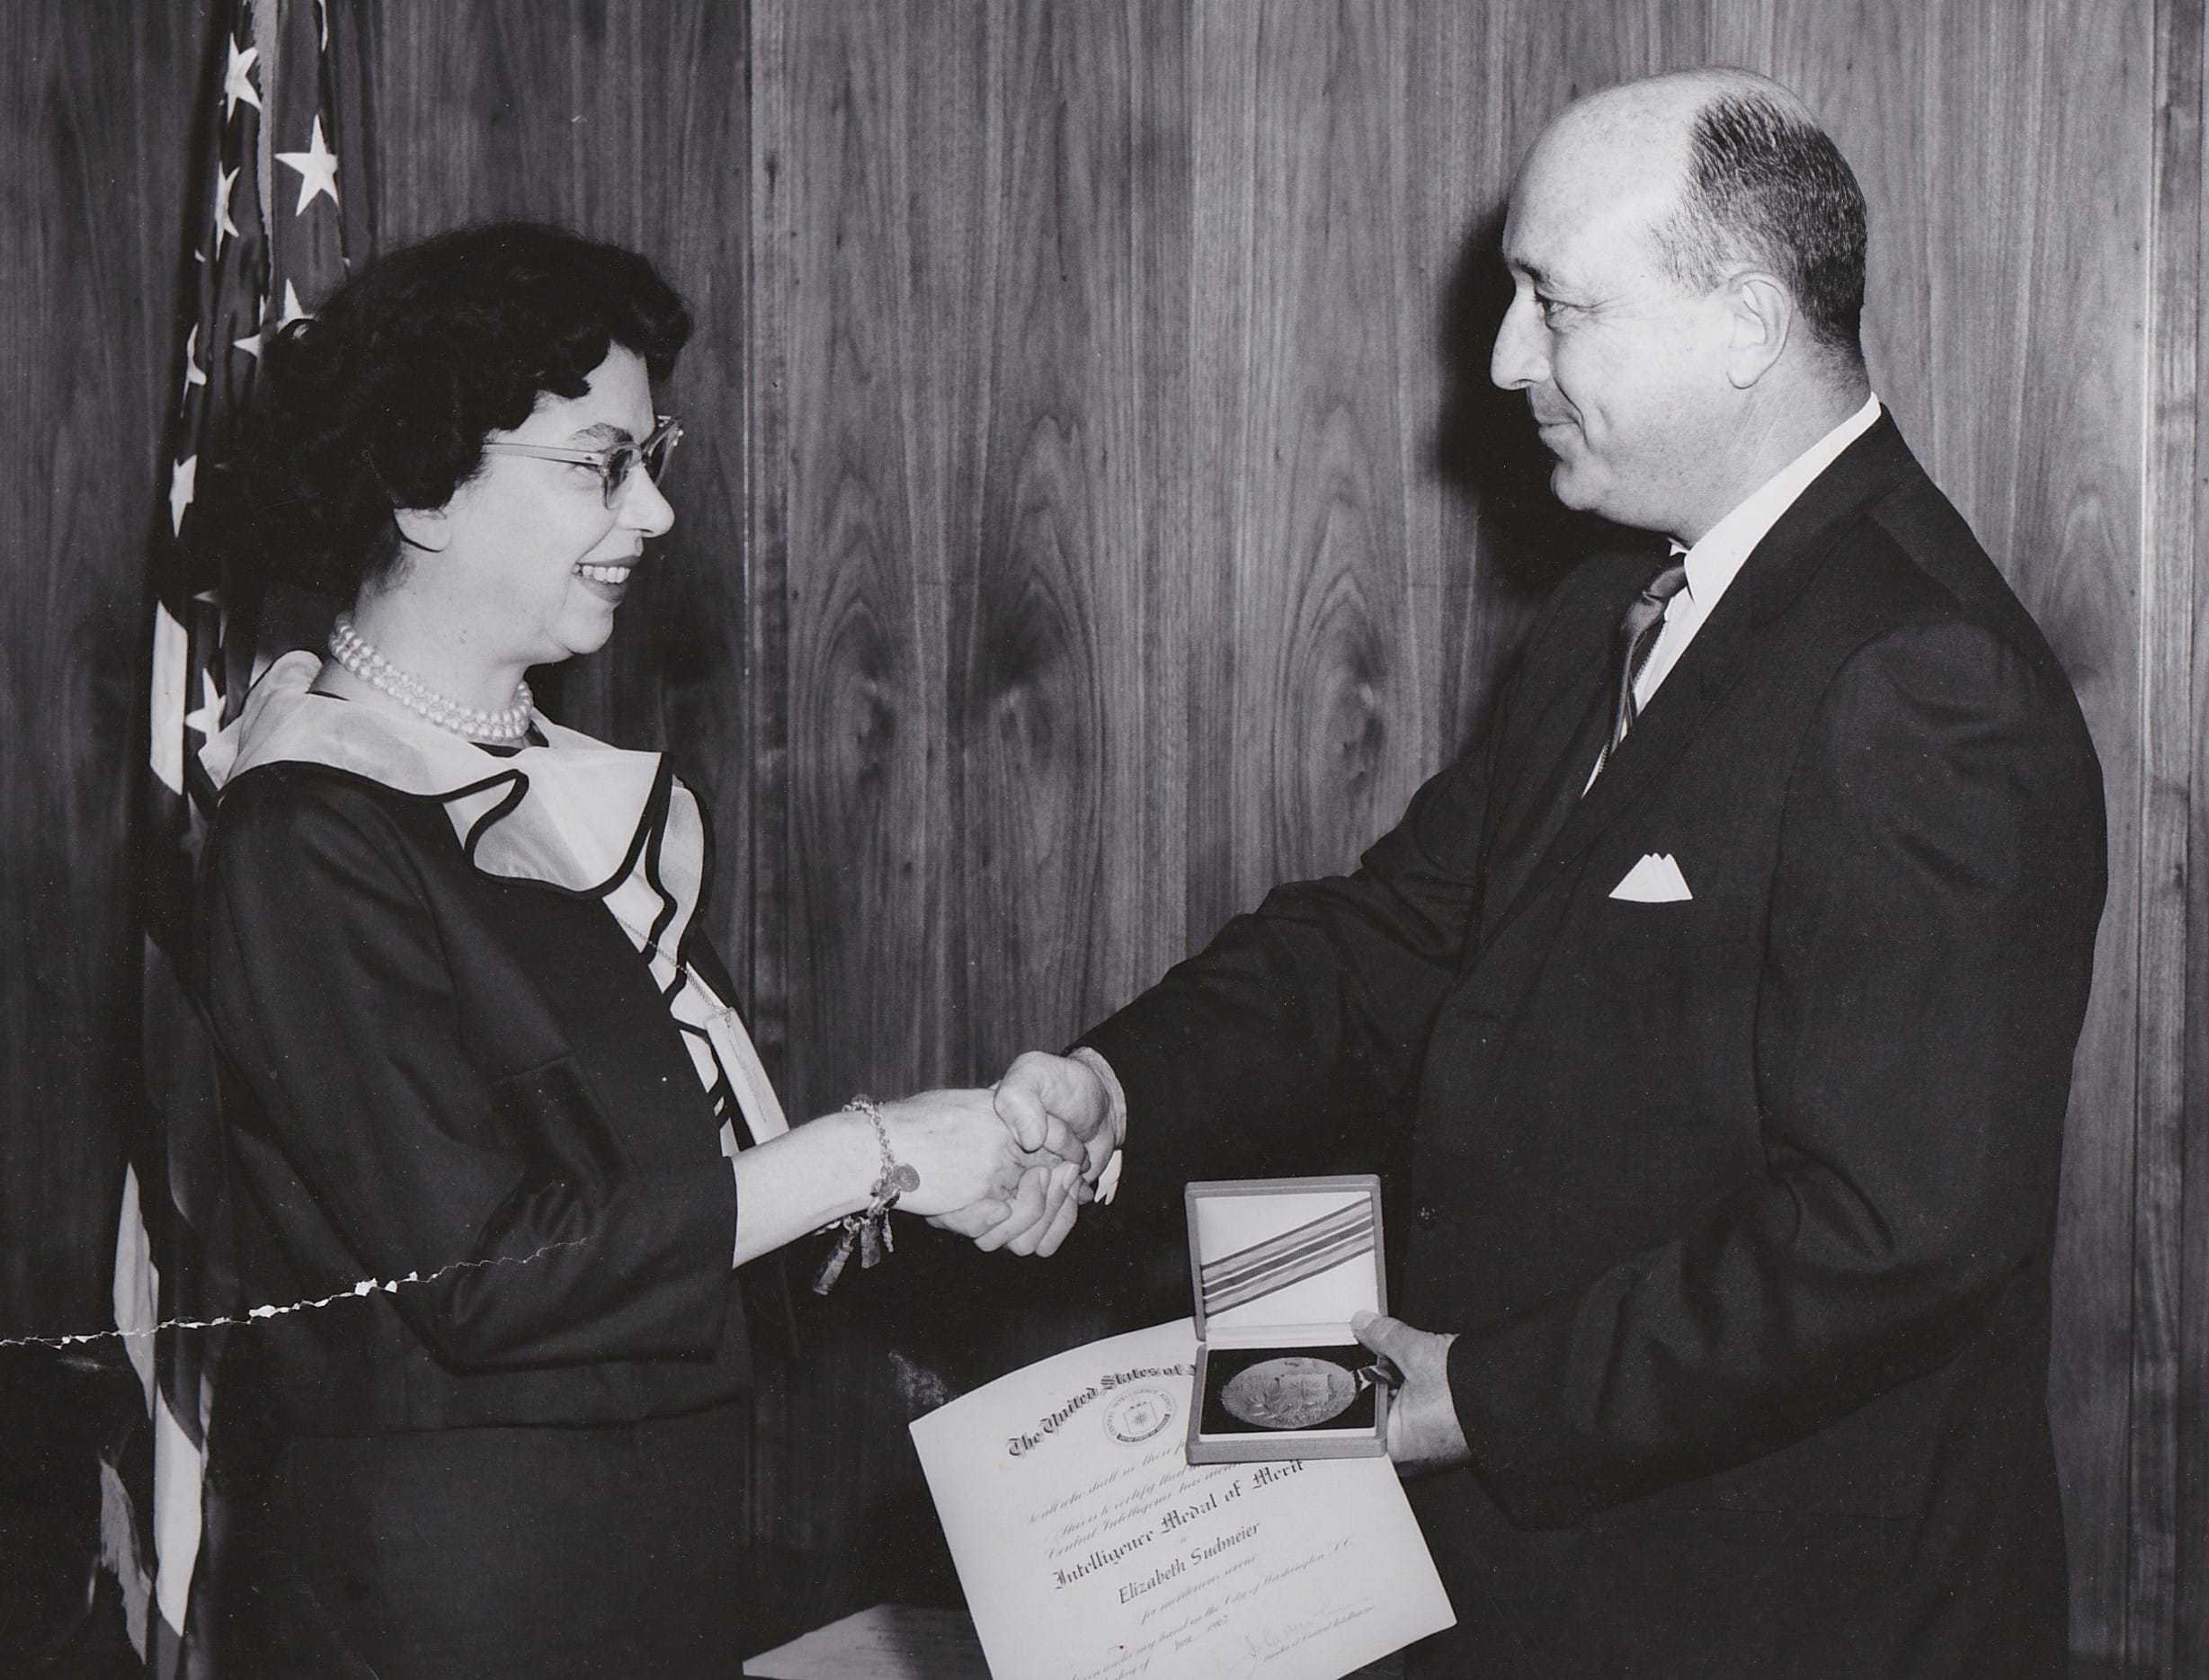 A black and white photograph of Elizabeth shaking hands in front of an American flag while receiving IMM award.